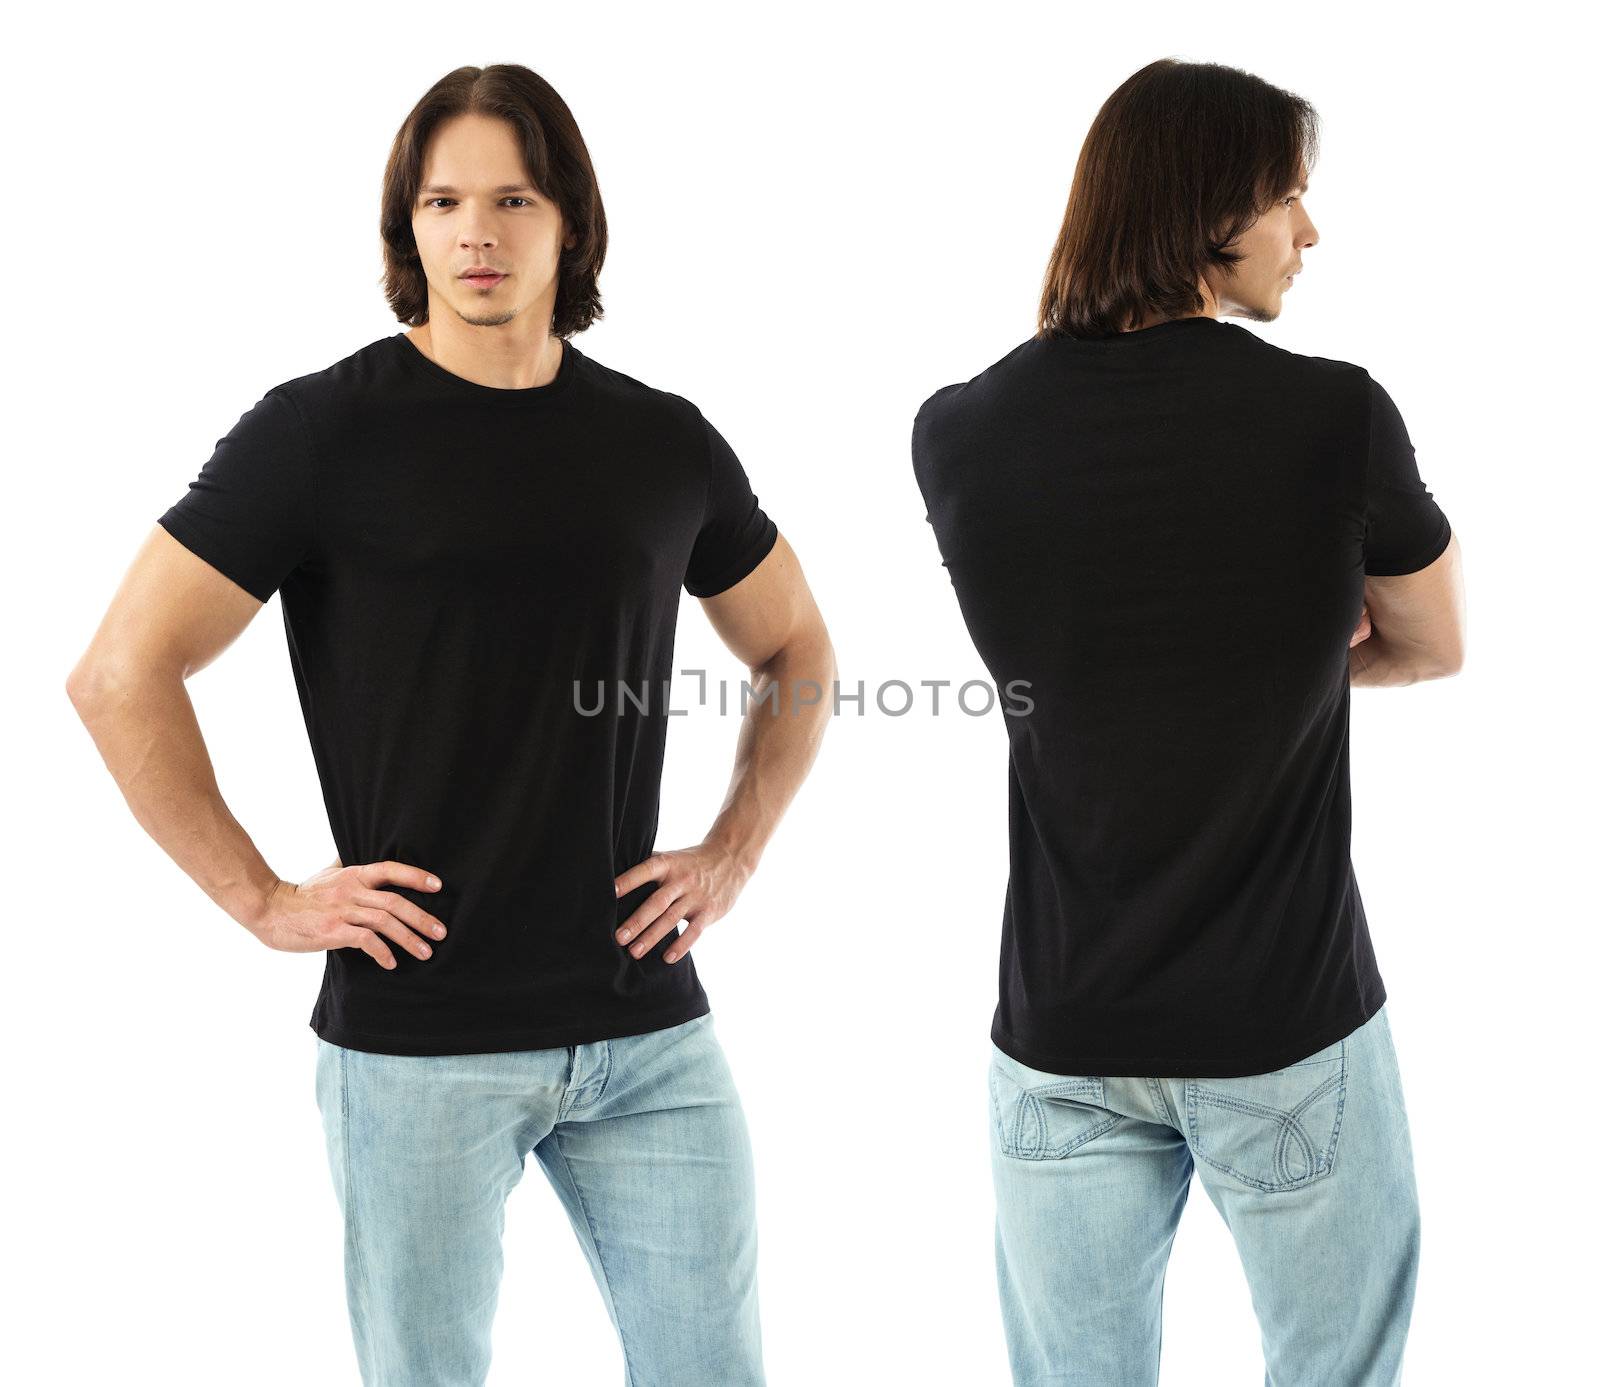 Photo of a muscular man wearing blank black t-shirt, front and back. Ready for your design or artwork.